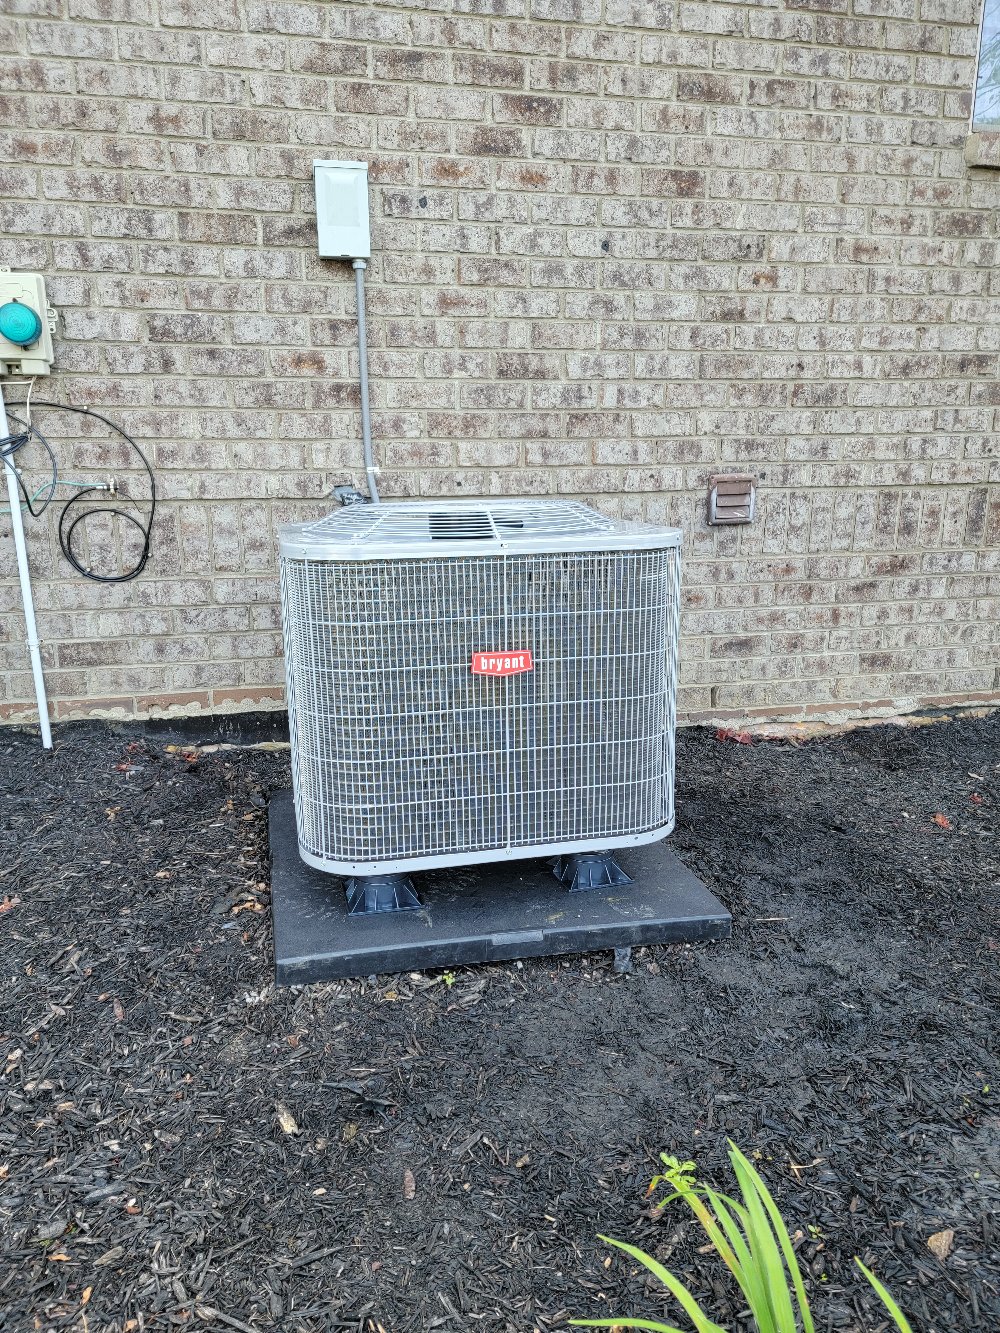 Hail Damaged Condensing Coil Fins to New Heat Pump, Waterford Subdivision, Madison County, KY